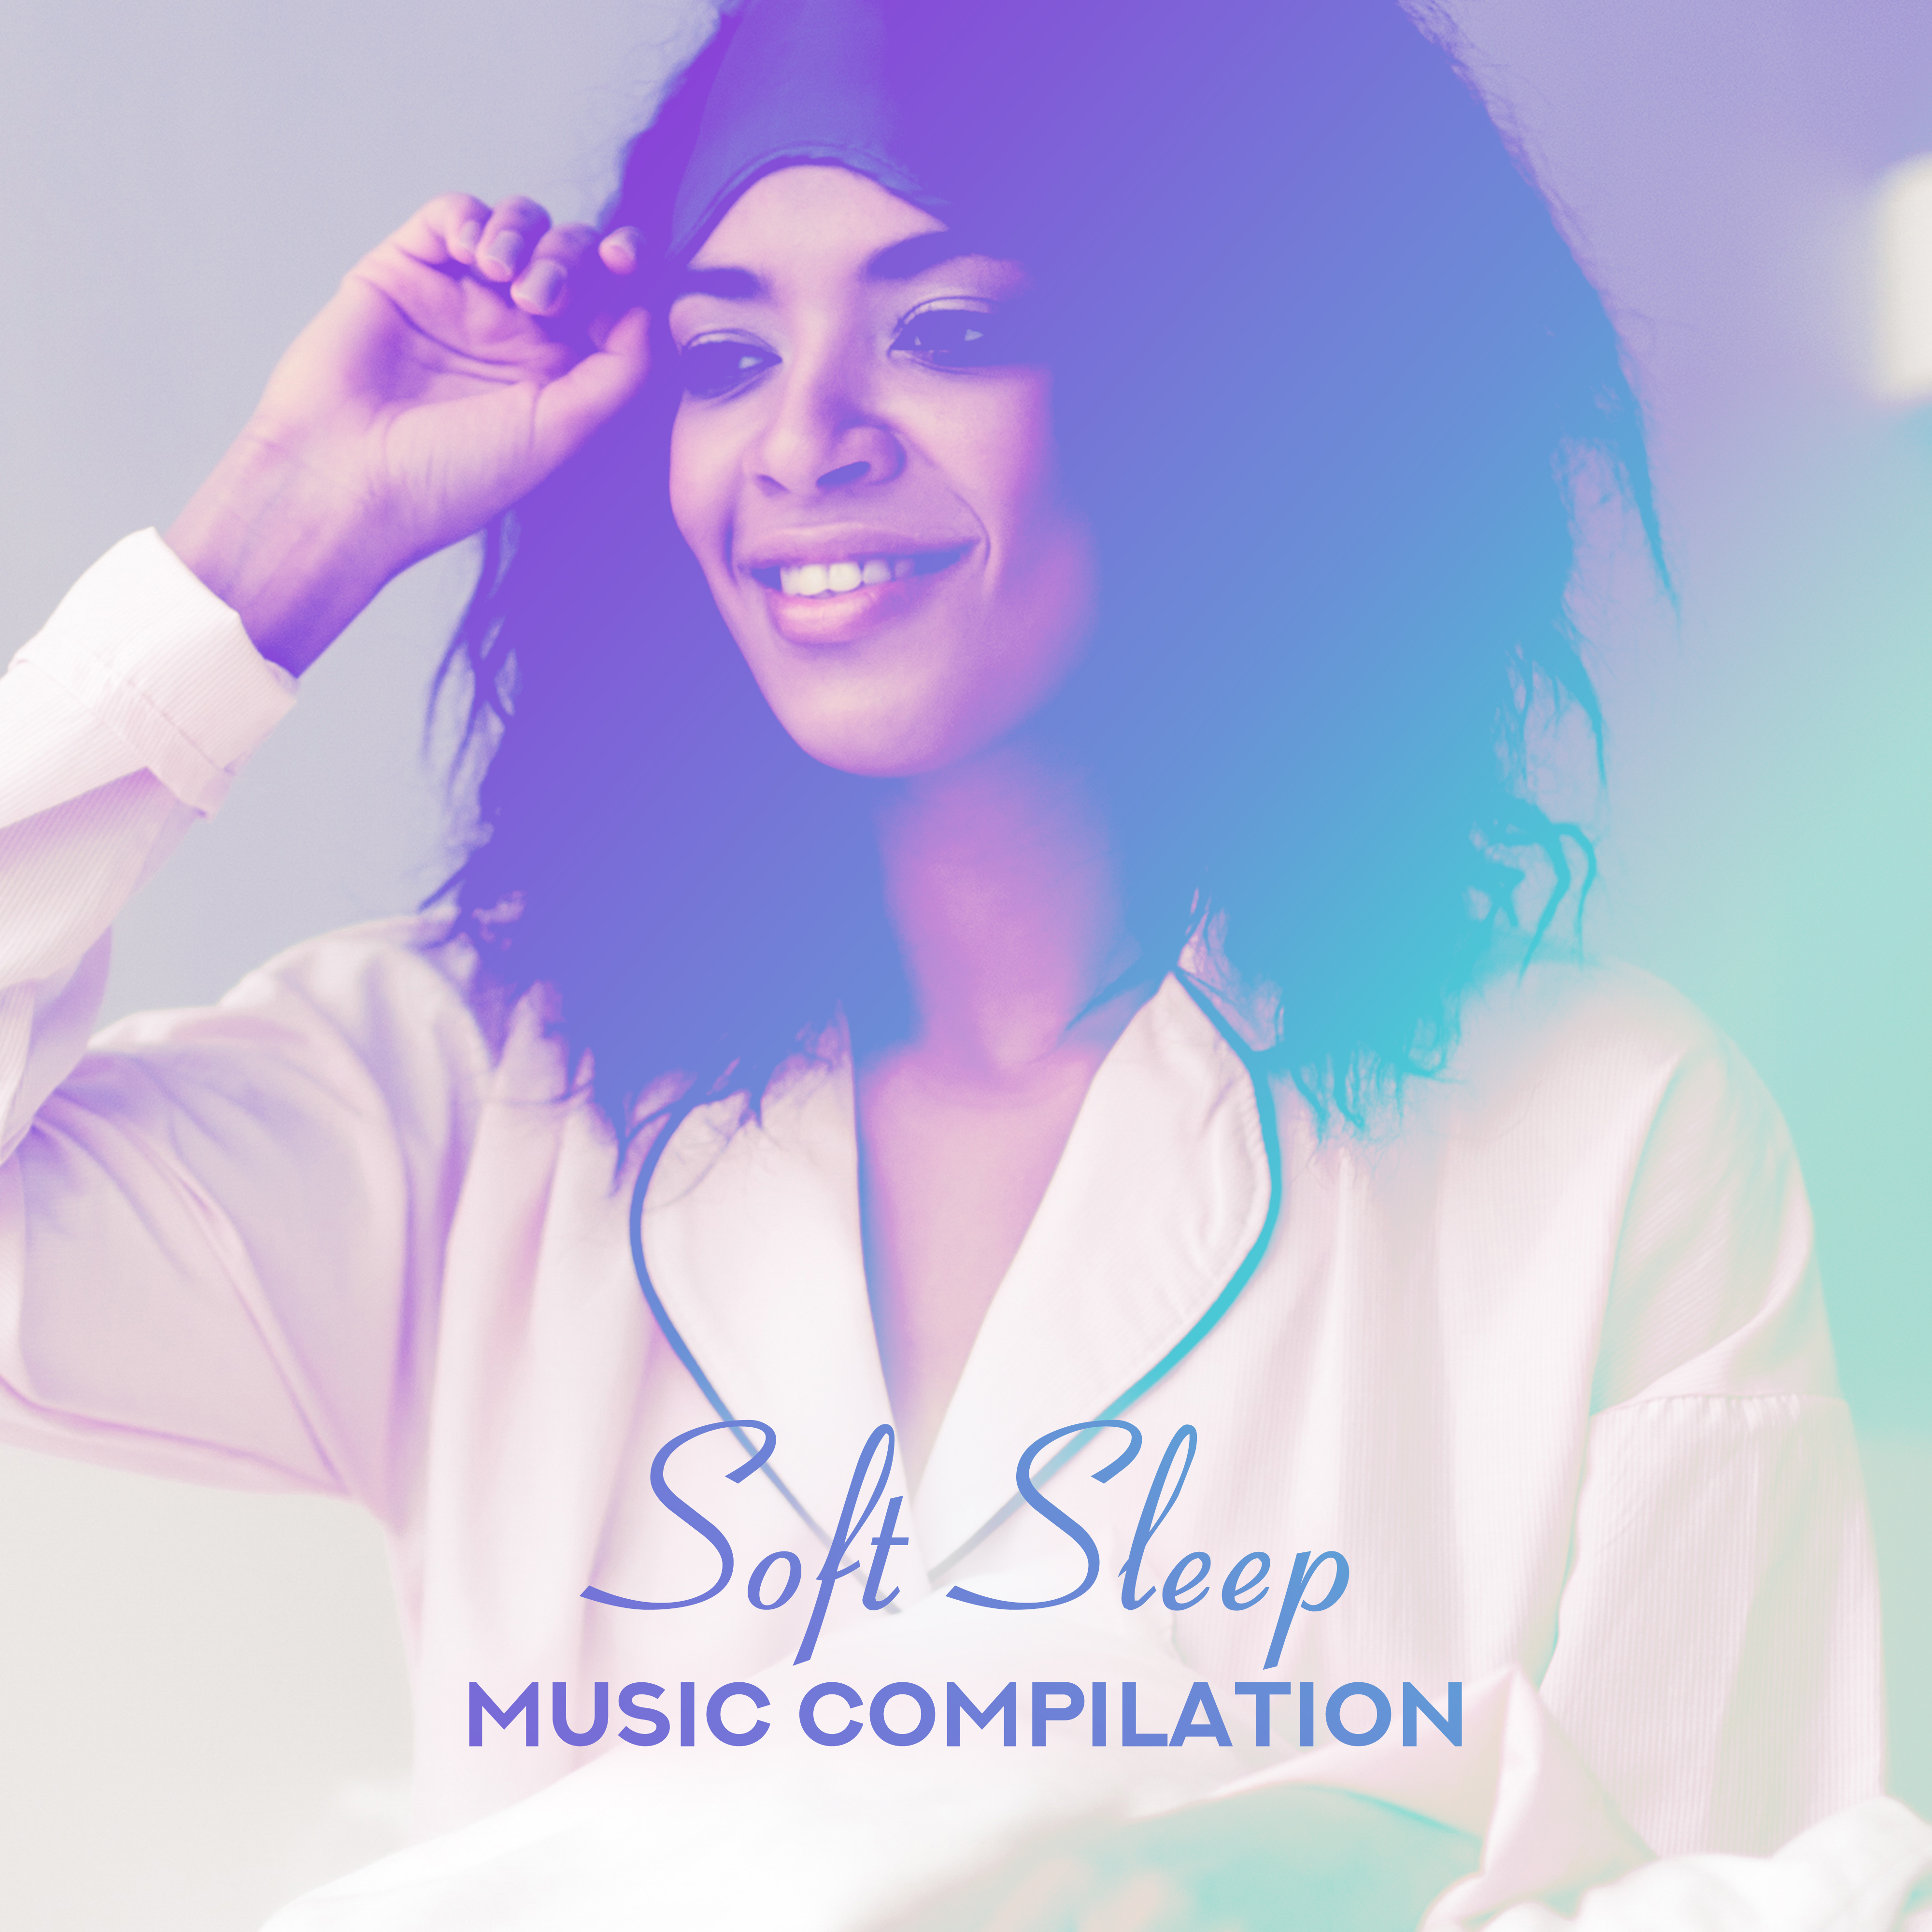 Soft Sleep Music Compilation  New Age Goodnight Lullabies, Sounds to Cure Insomnia, Sleep Deeply